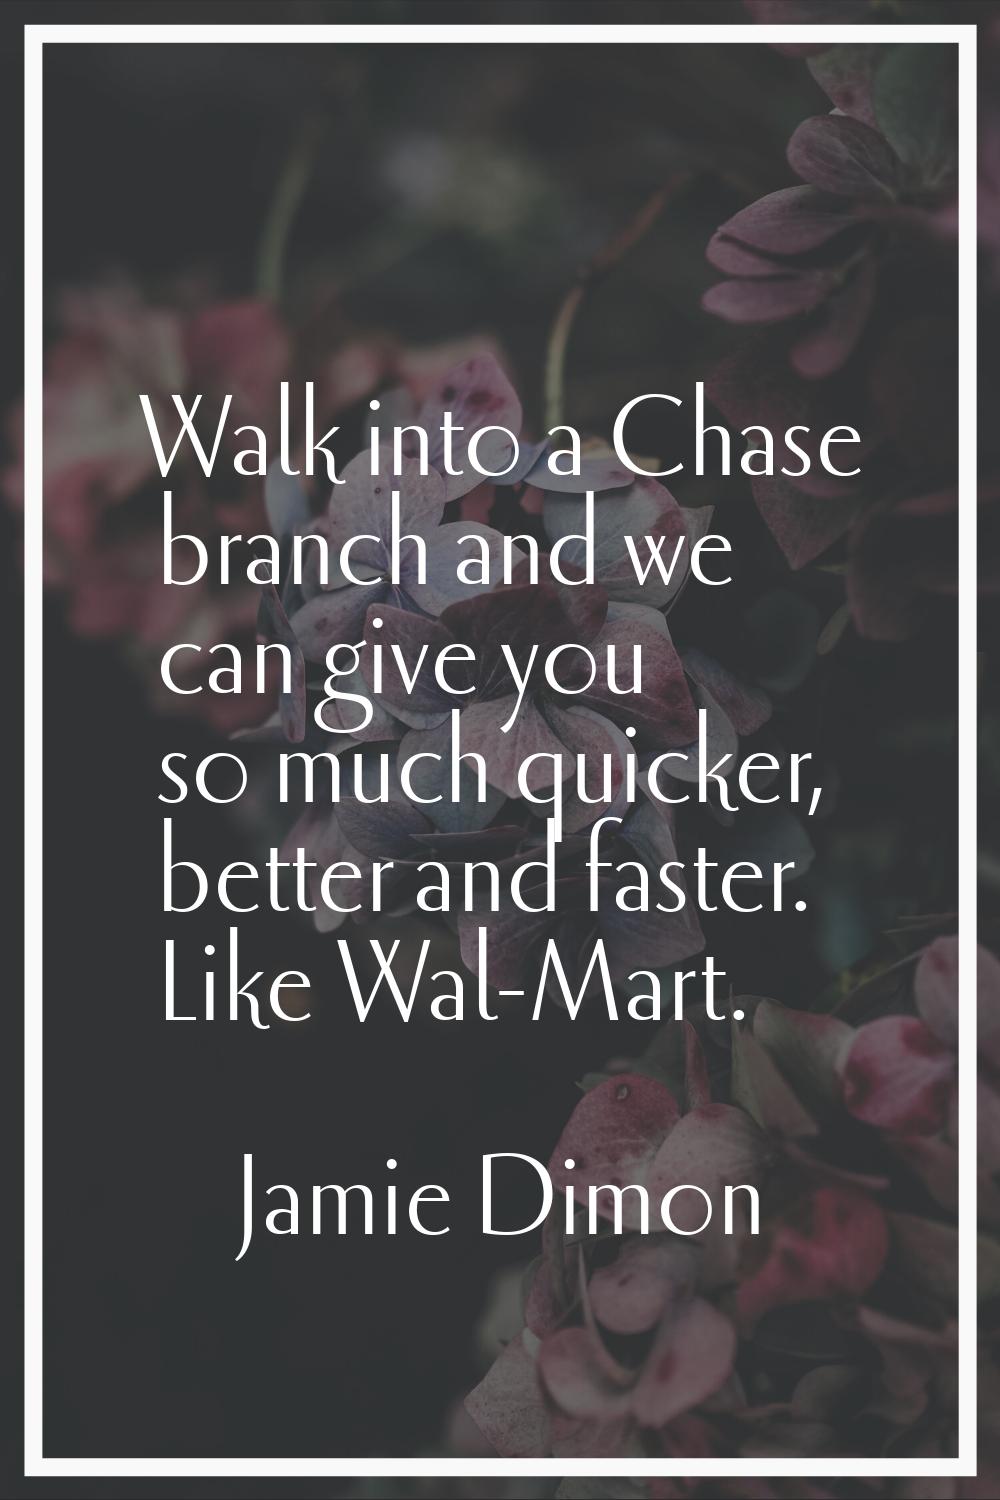 Walk into a Chase branch and we can give you so much quicker, better and faster. Like Wal-Mart.